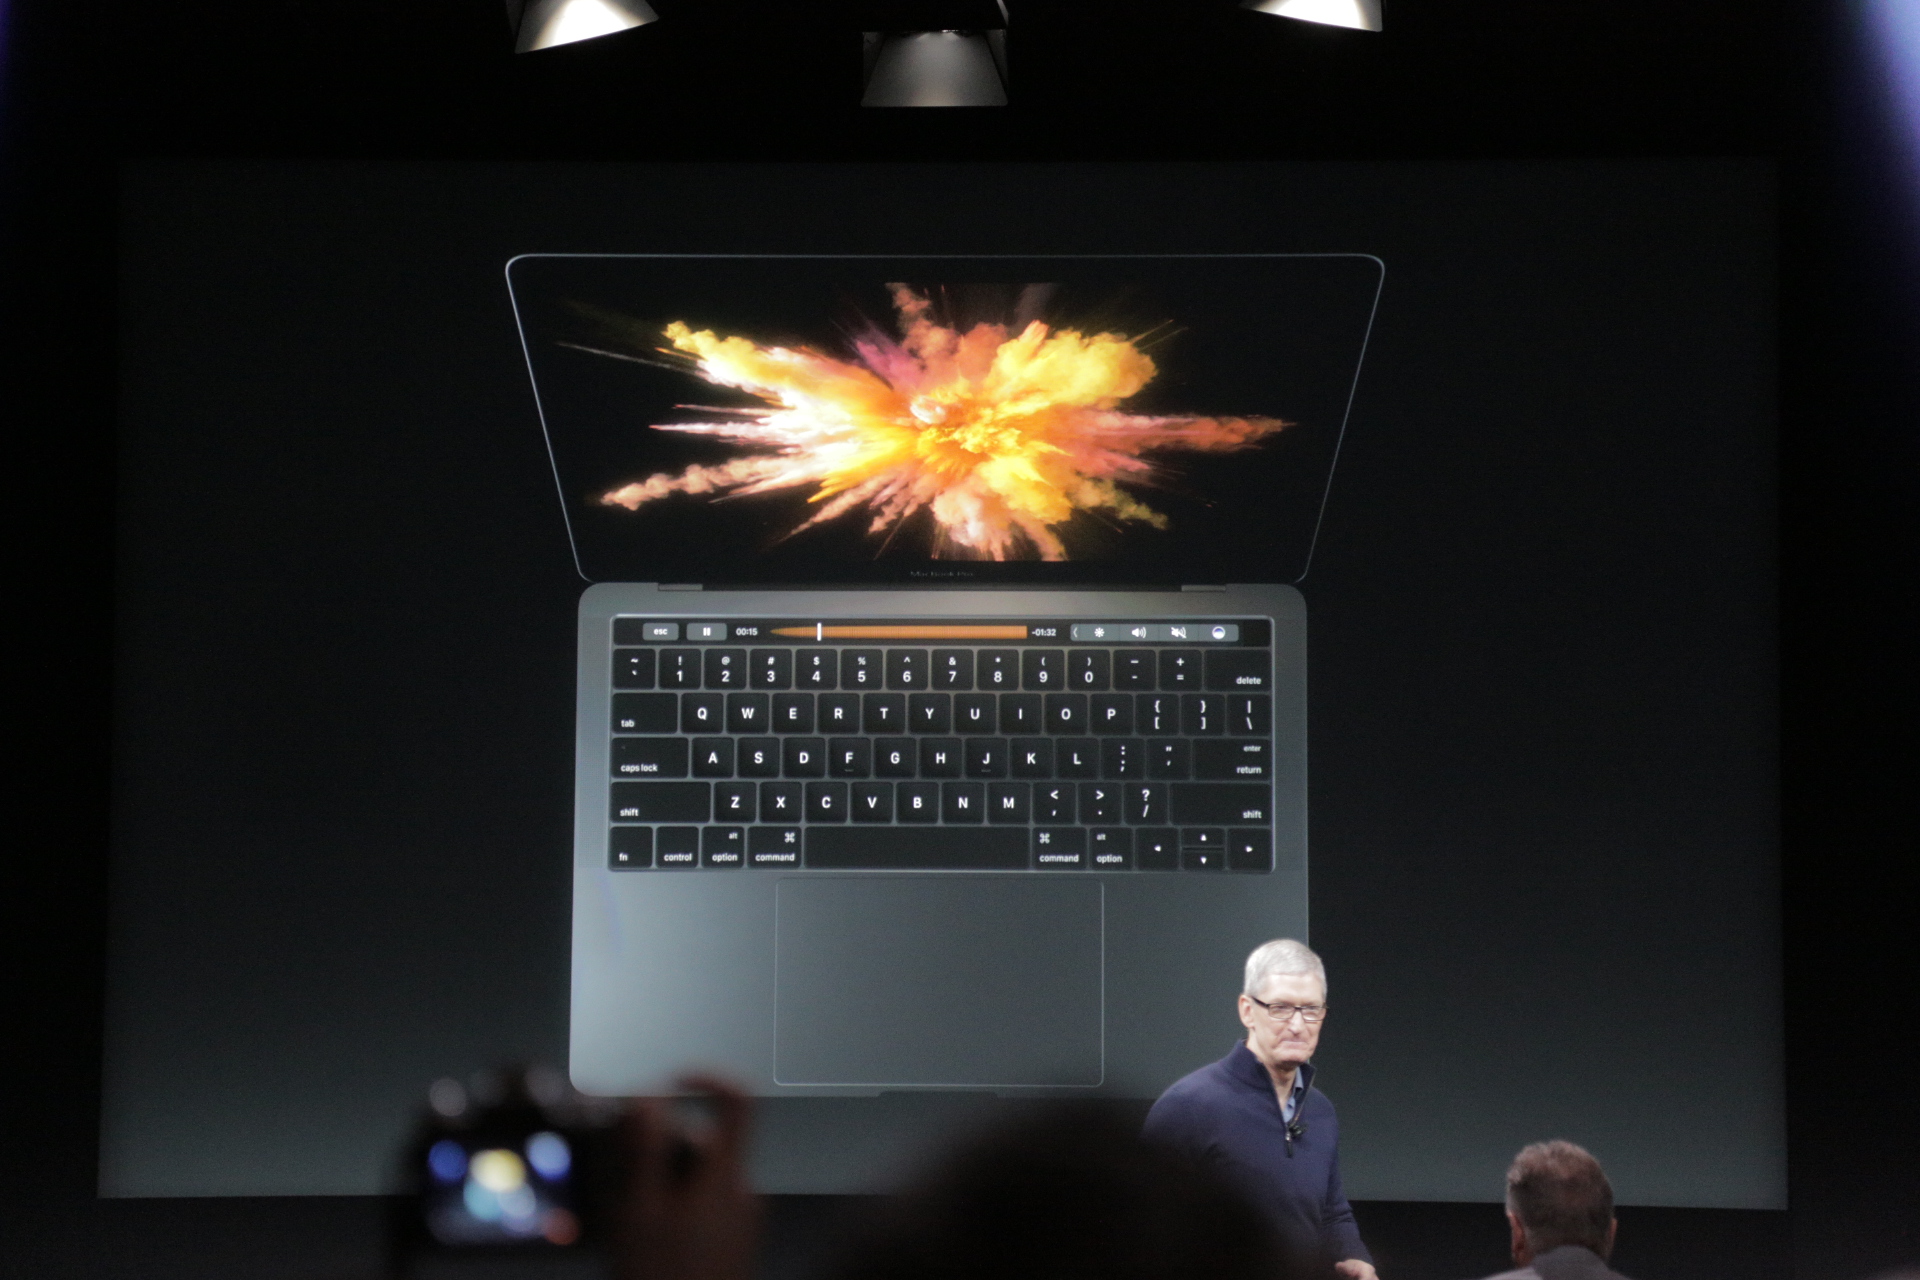 PC/タブレット ノートPC The new MacBook Pro is here | TechCrunch